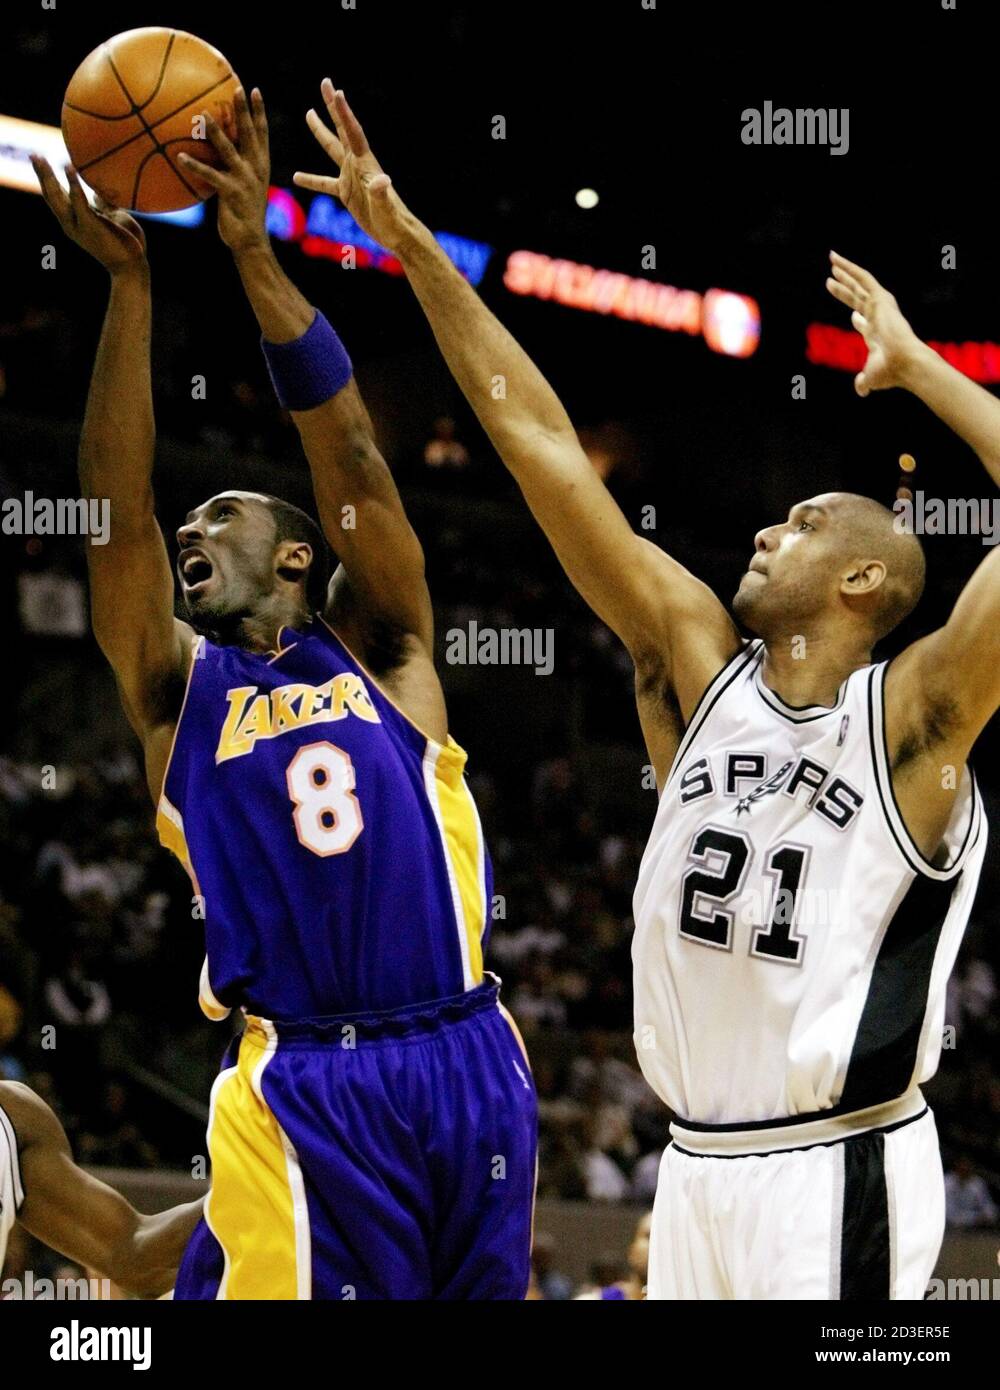 MATARRATOS (Juego con números e imágenes) Los-angeles-lakers-guard-kobe-bryant-8-puts-up-a-shot-against-san-antonio-spurs-forward-tim-duncan-21-during-the-first-half-in-game-5-of-the-nba-western-conference-semifinals-in-san-antonio-texas-may-13-2004-the-spurs-and-lakers-are-tied-at-two-games-each-in-the-best-of-seven-series-reutersjeff-mitchell-jm-2D3ER5E